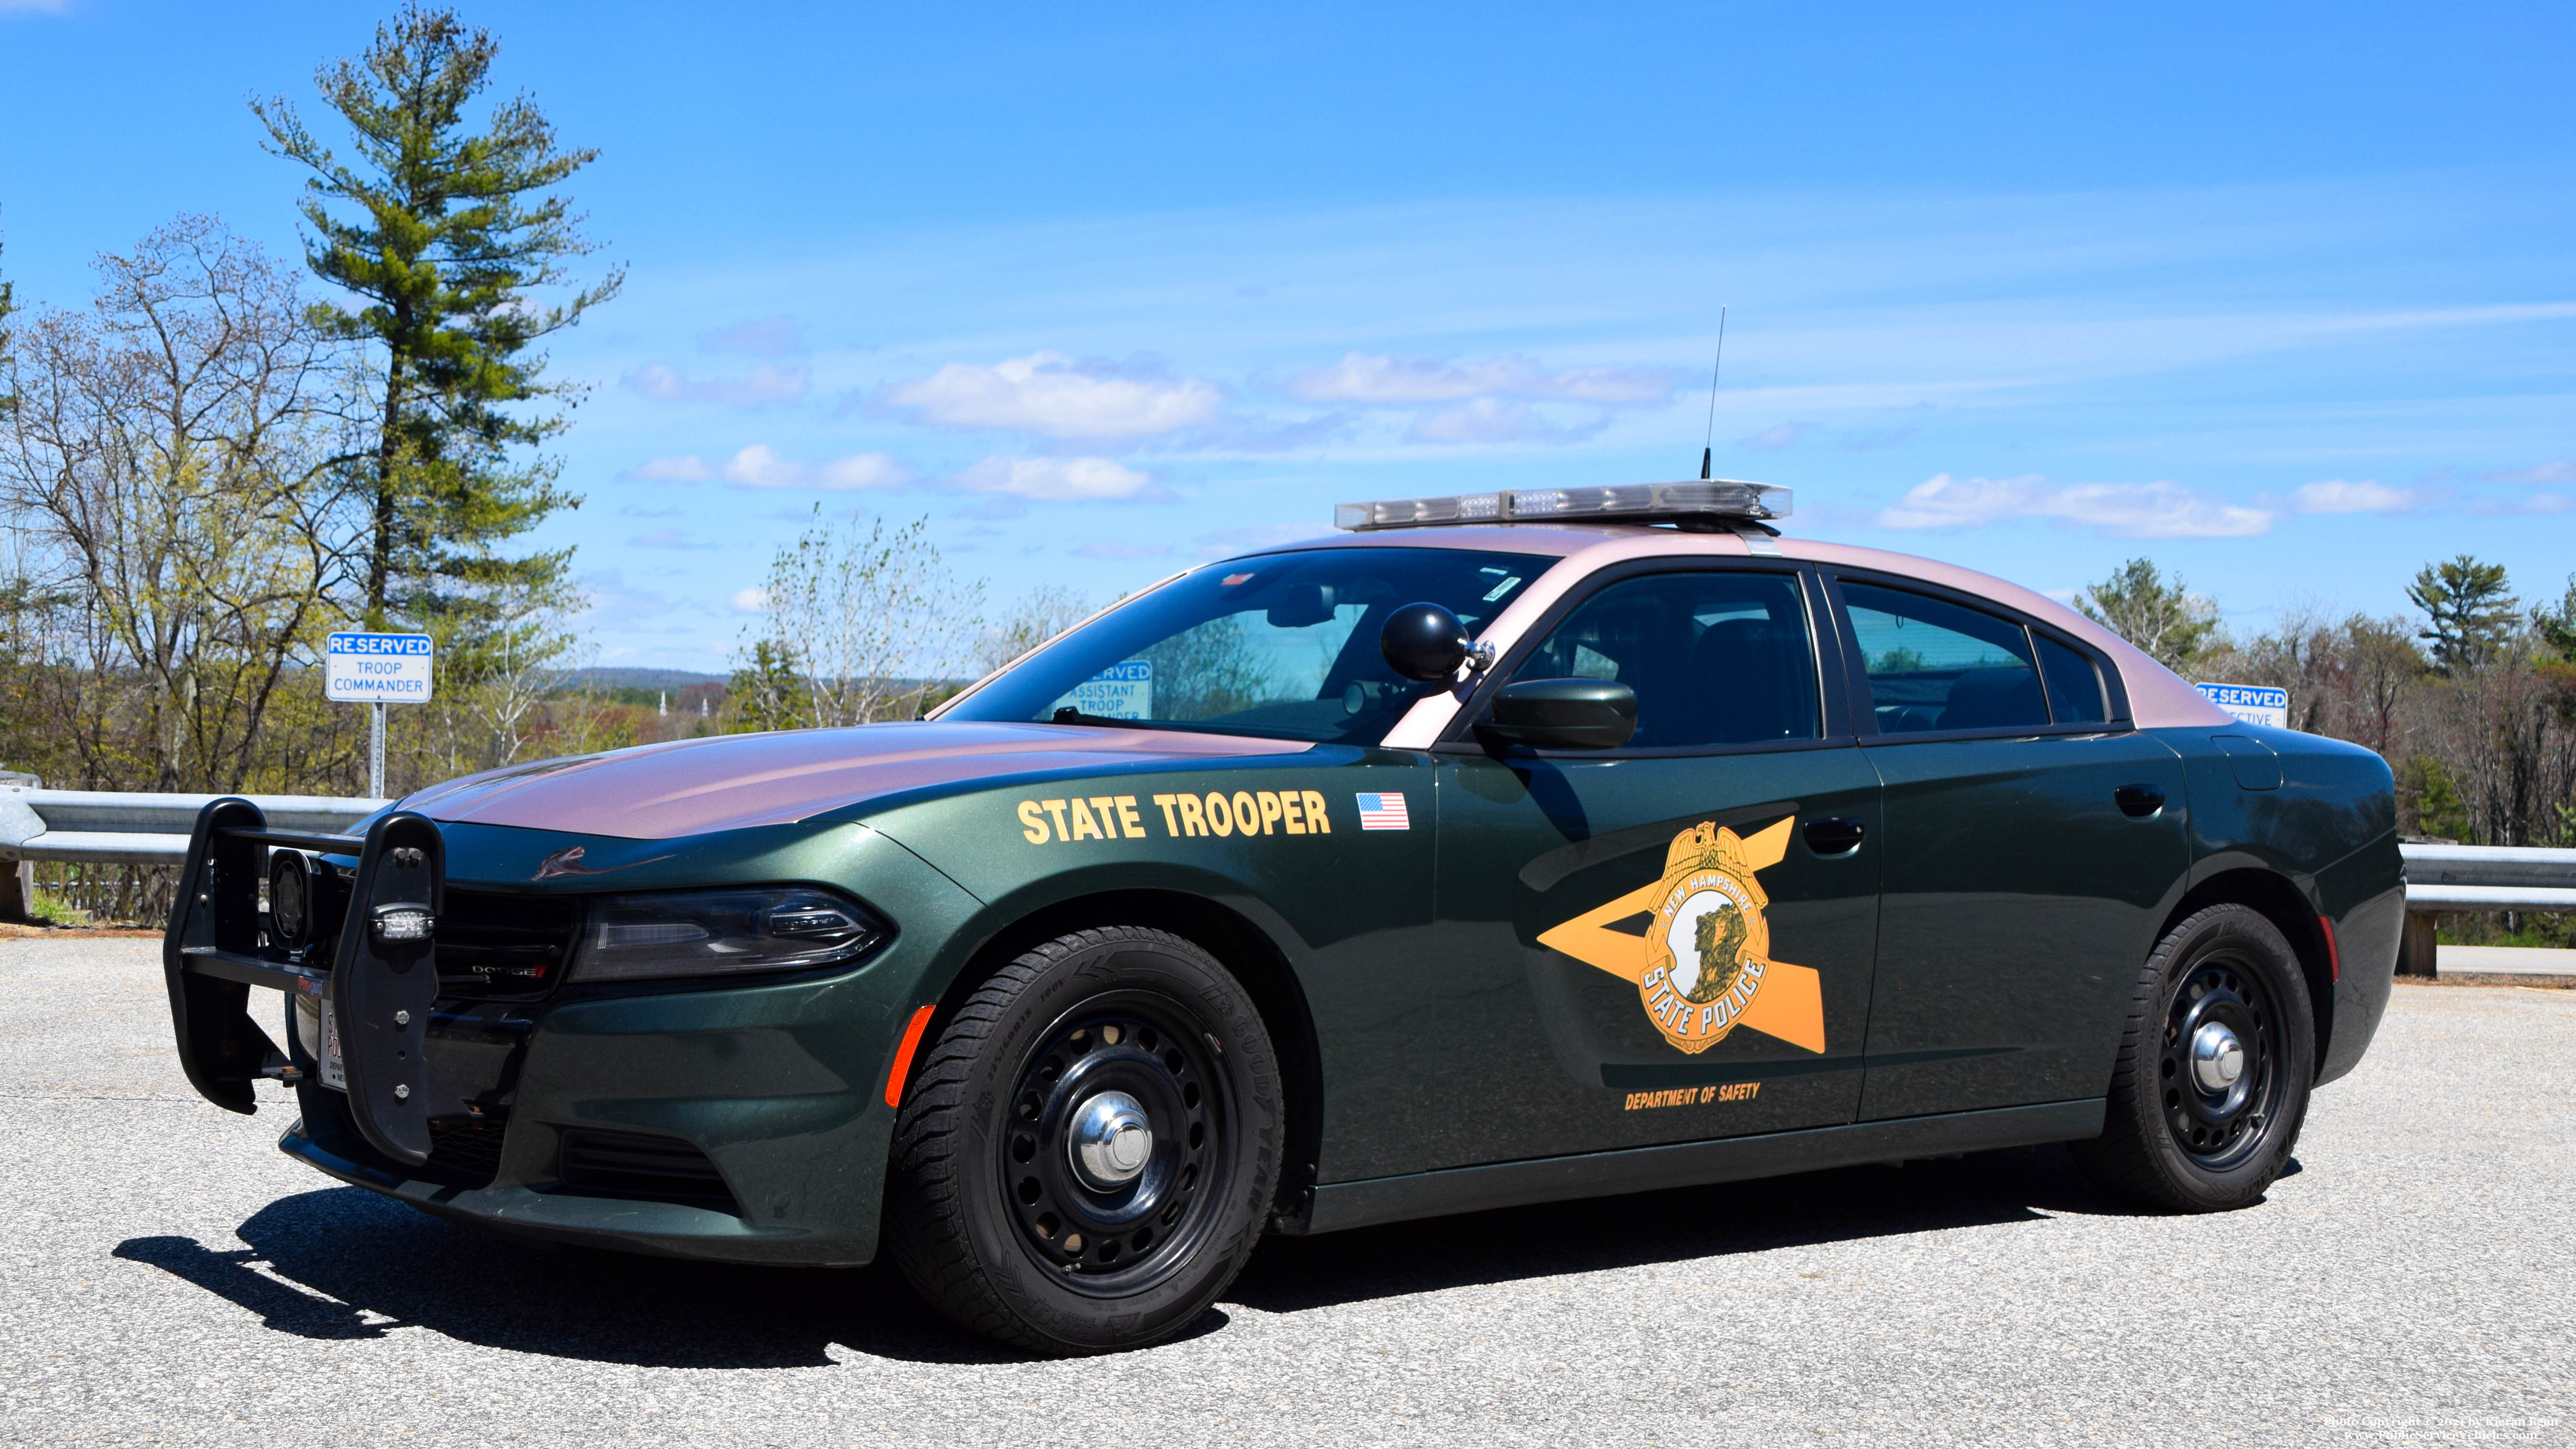 A photo  of New Hampshire State Police
            Cruiser 431, a 2017 Dodge Charger             taken by Kieran Egan